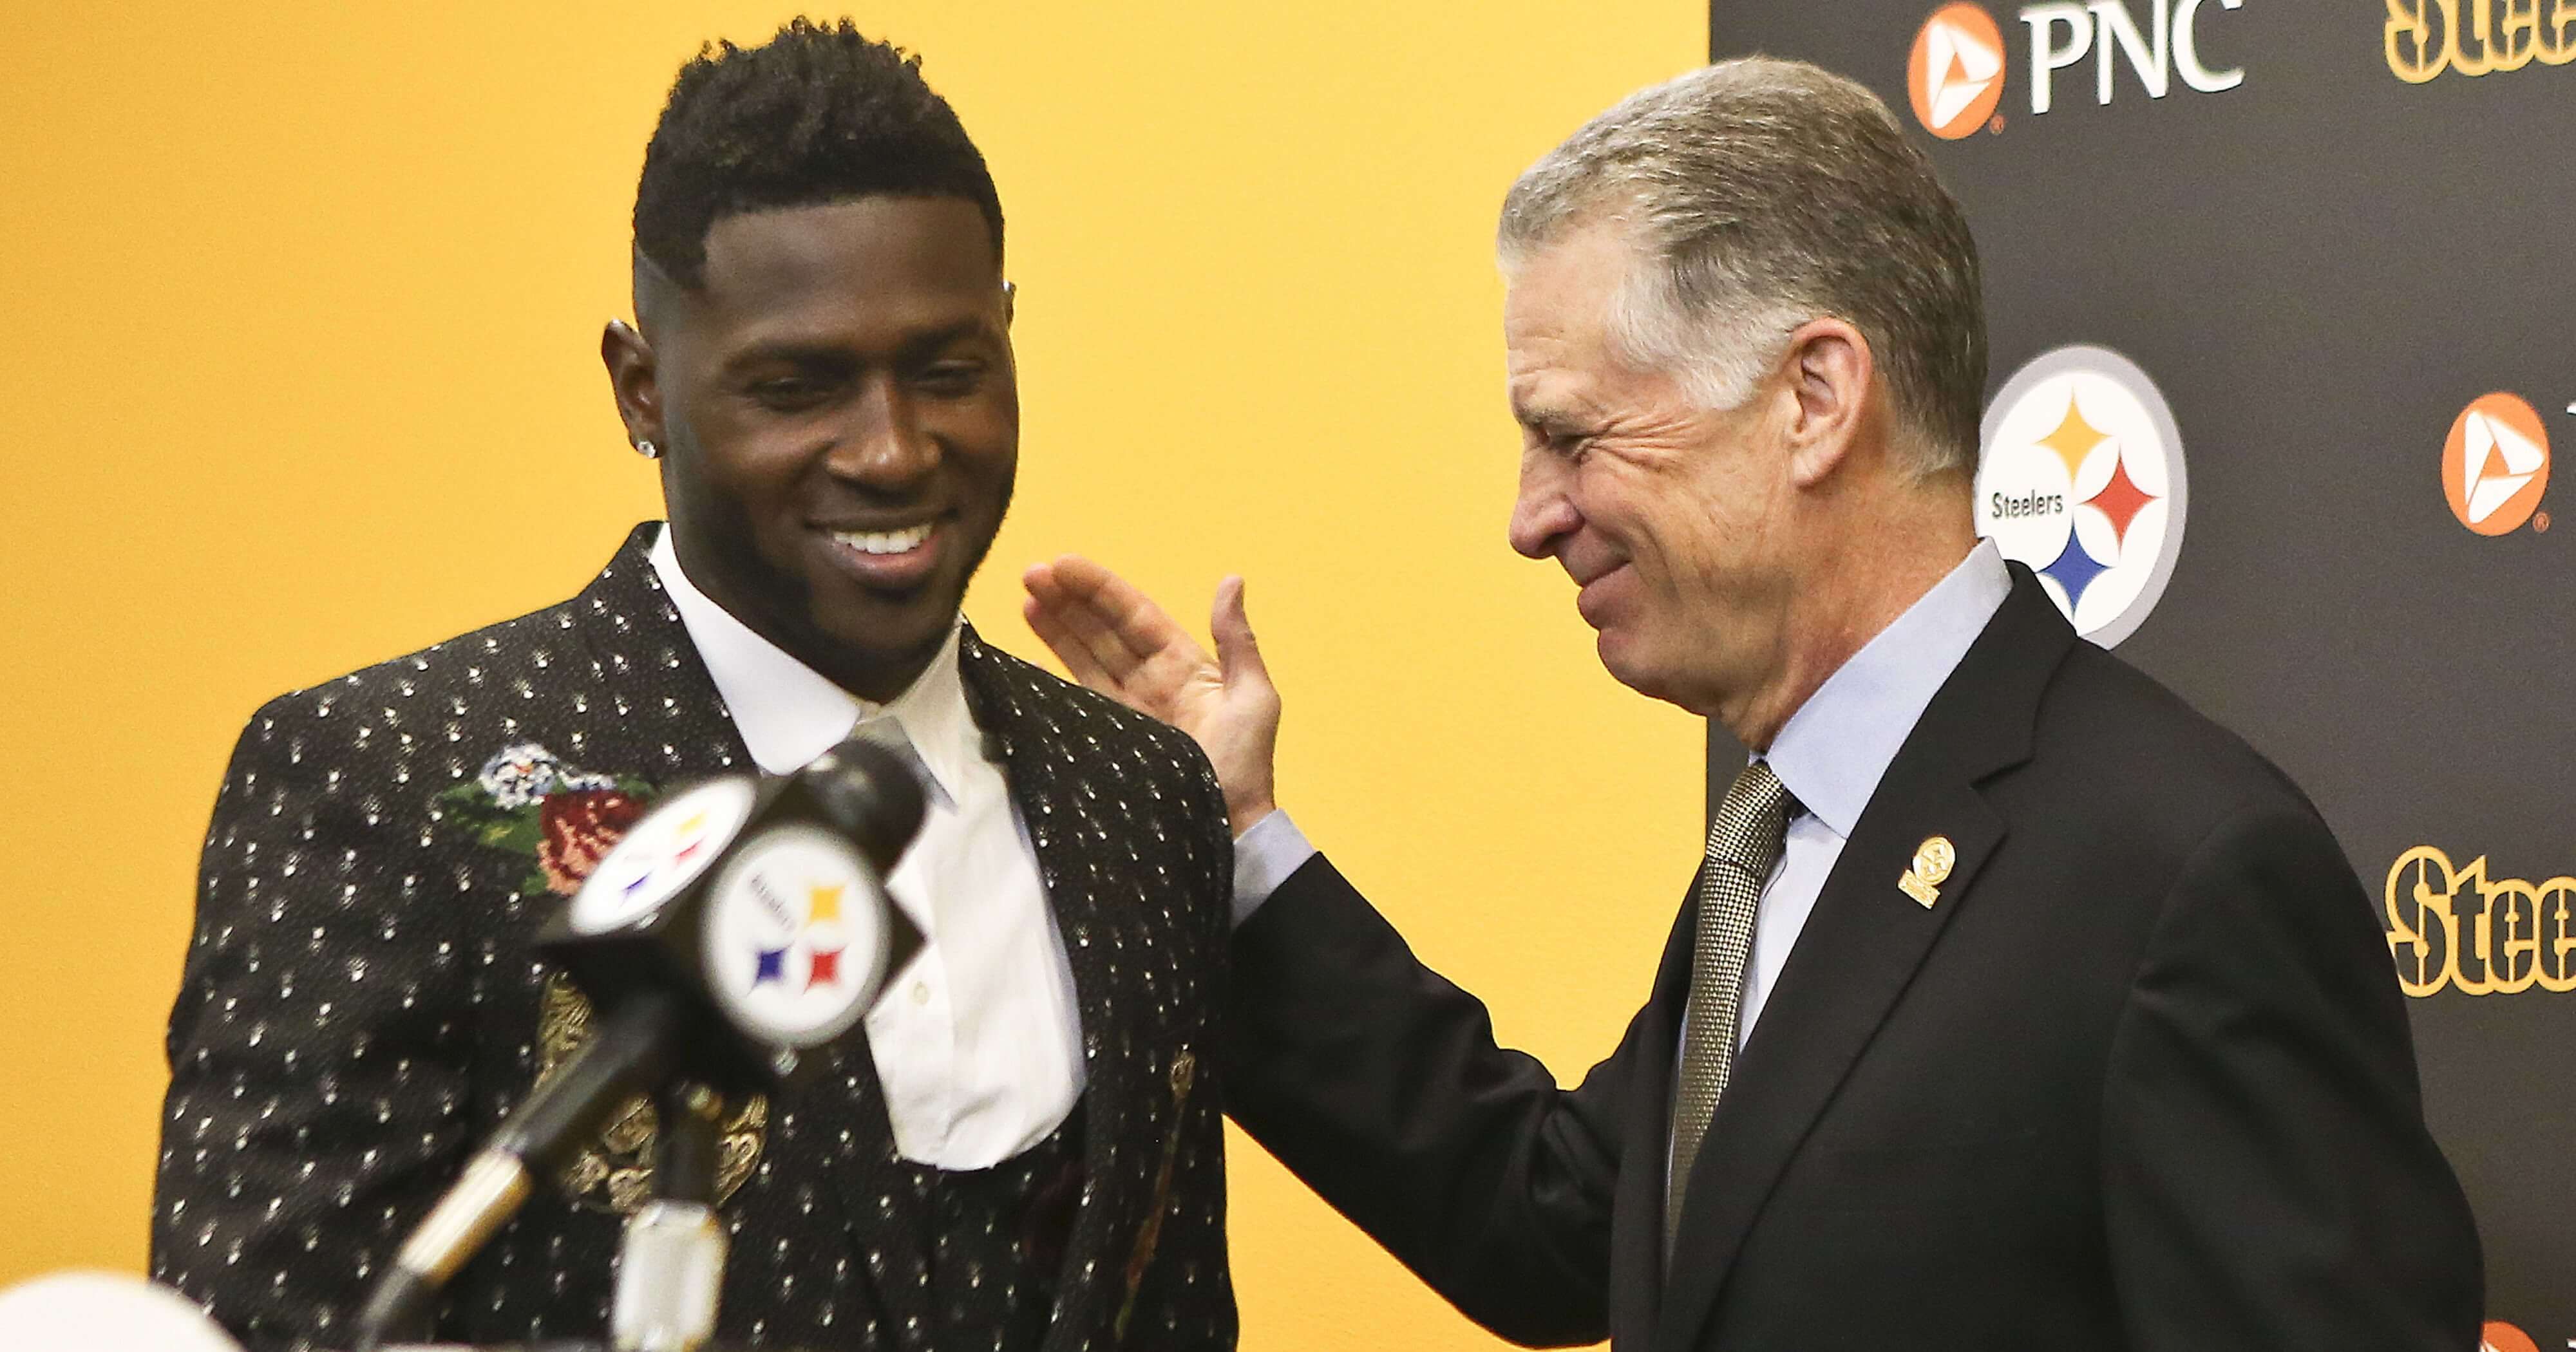 Pittsburgh Steelers wide receiver Antonio Brown, left, smiles as he is introduced by Steelers President Art Rooney II for a news conference about Brown's contract extension Feb. 28, 2017, in Pittsburgh